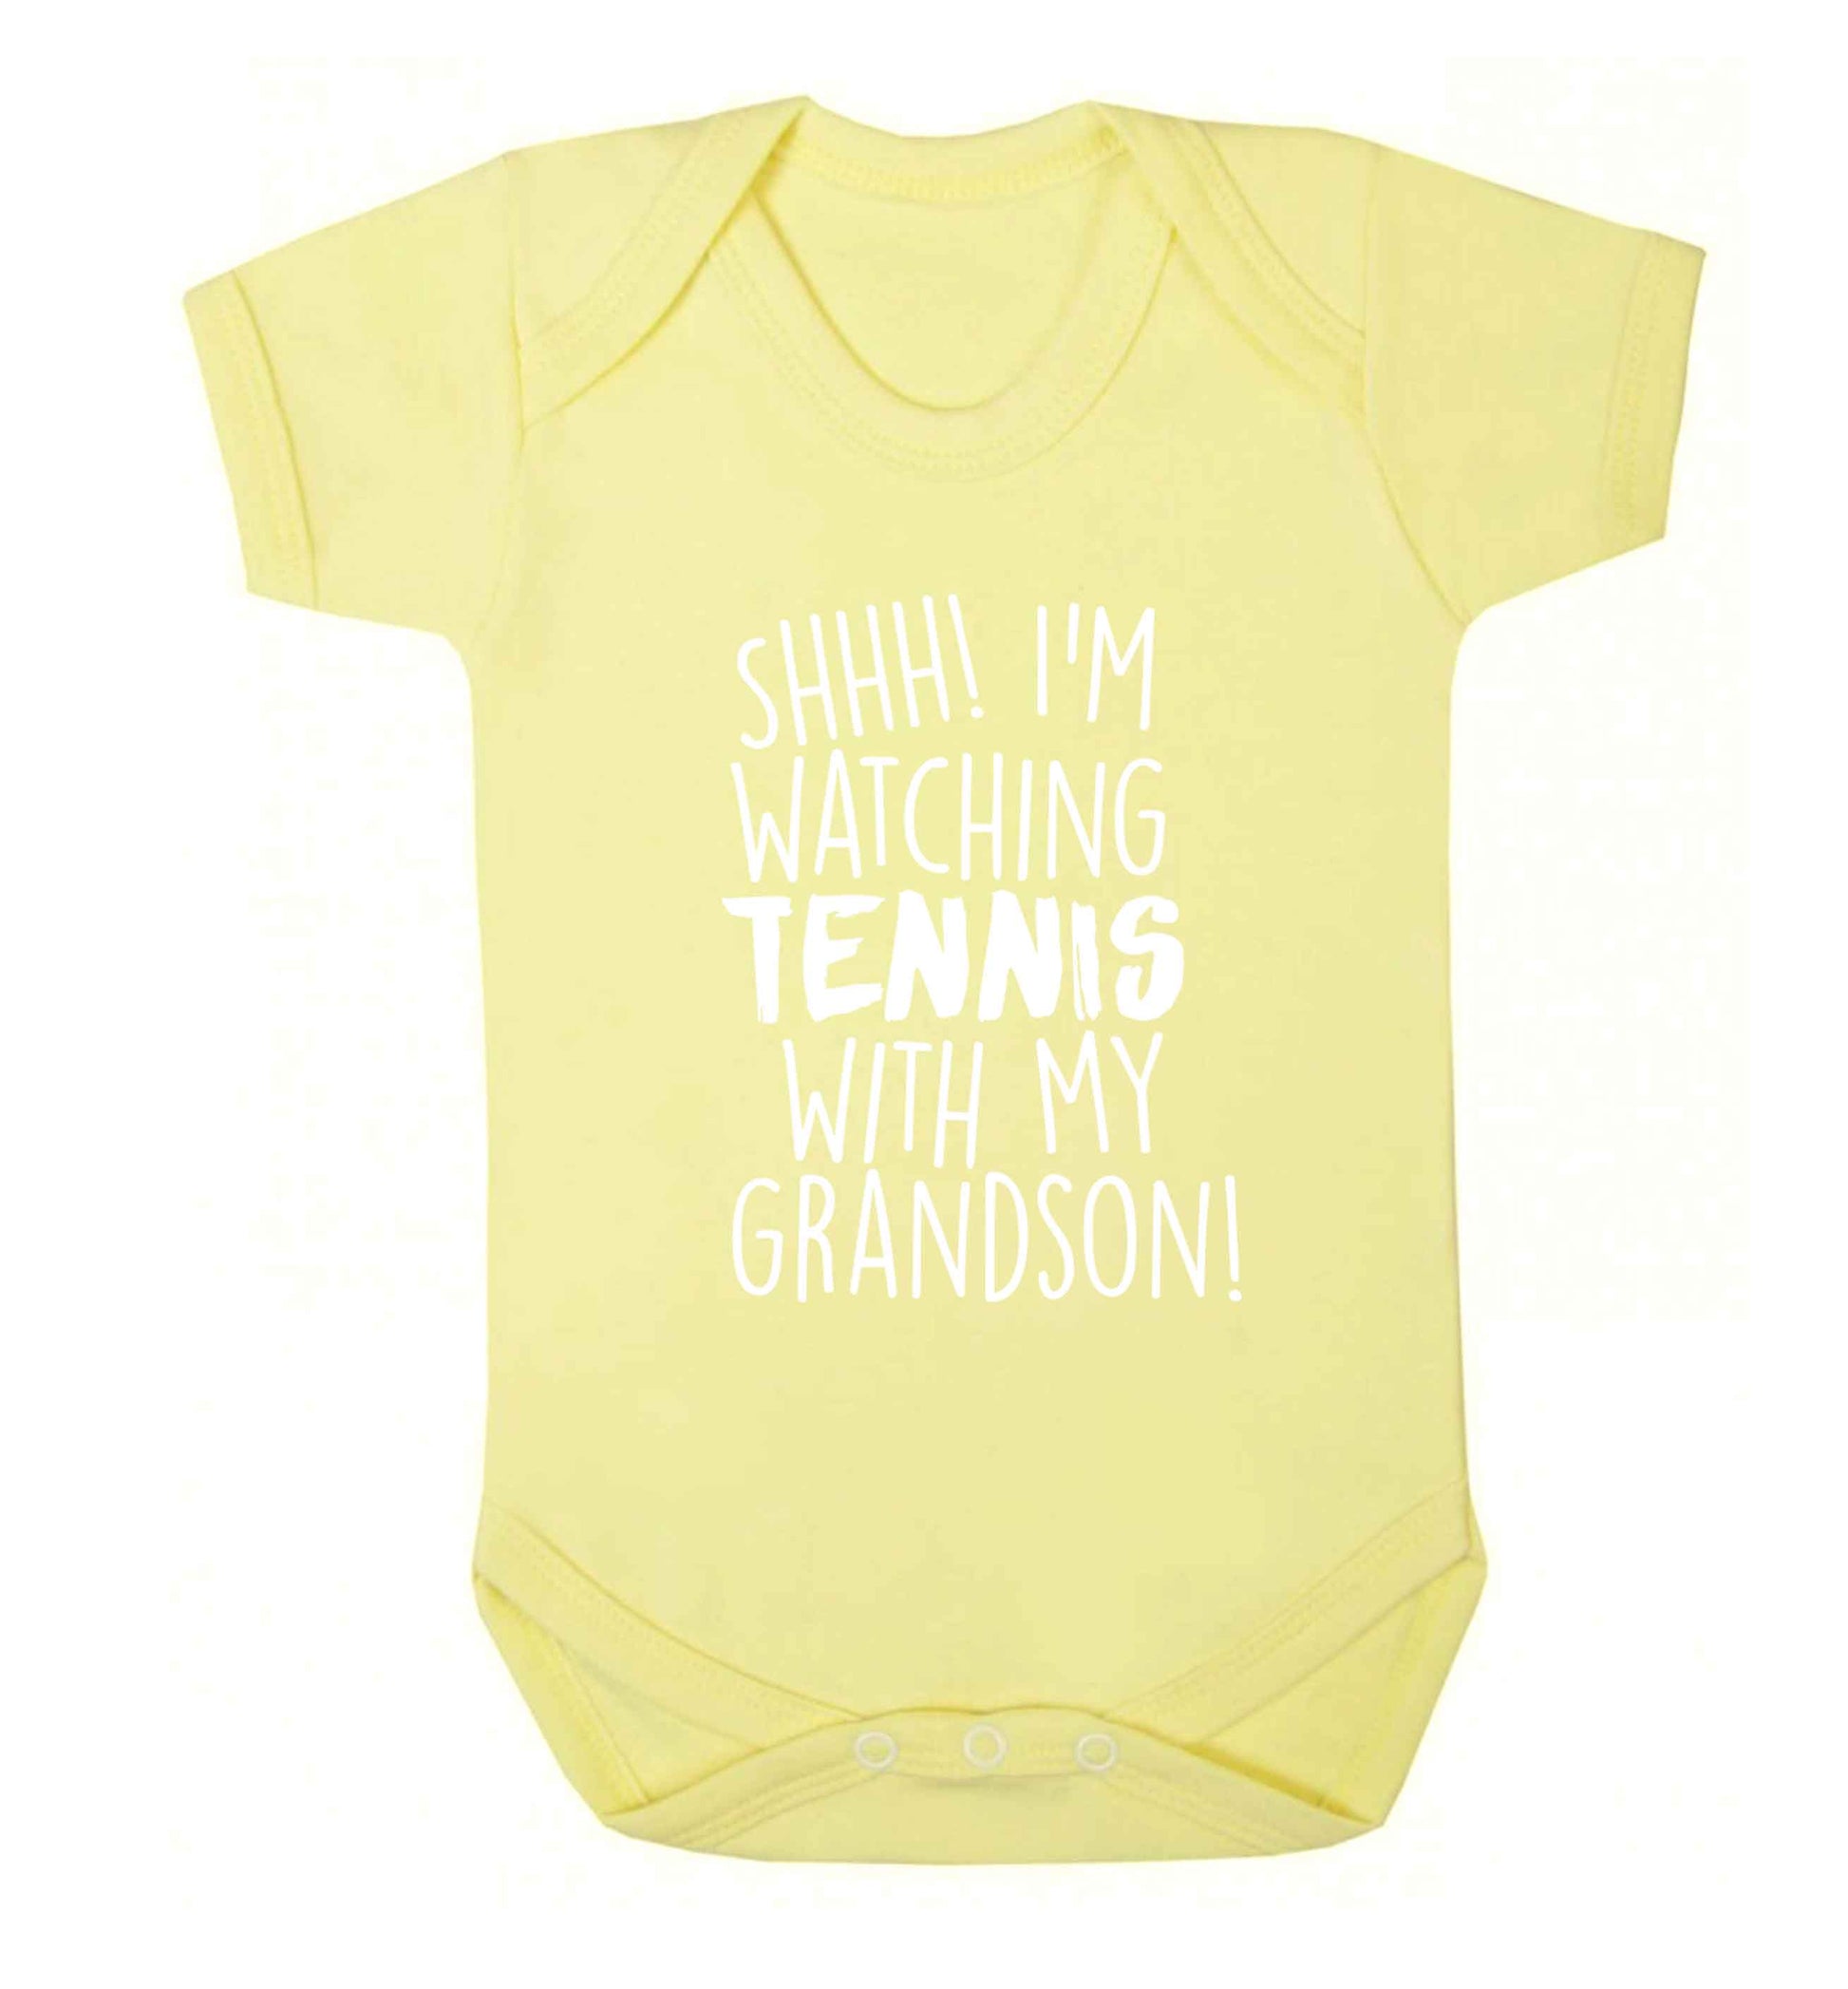 Shh! I'm watching tennis with my grandson! Baby Vest pale yellow 18-24 months